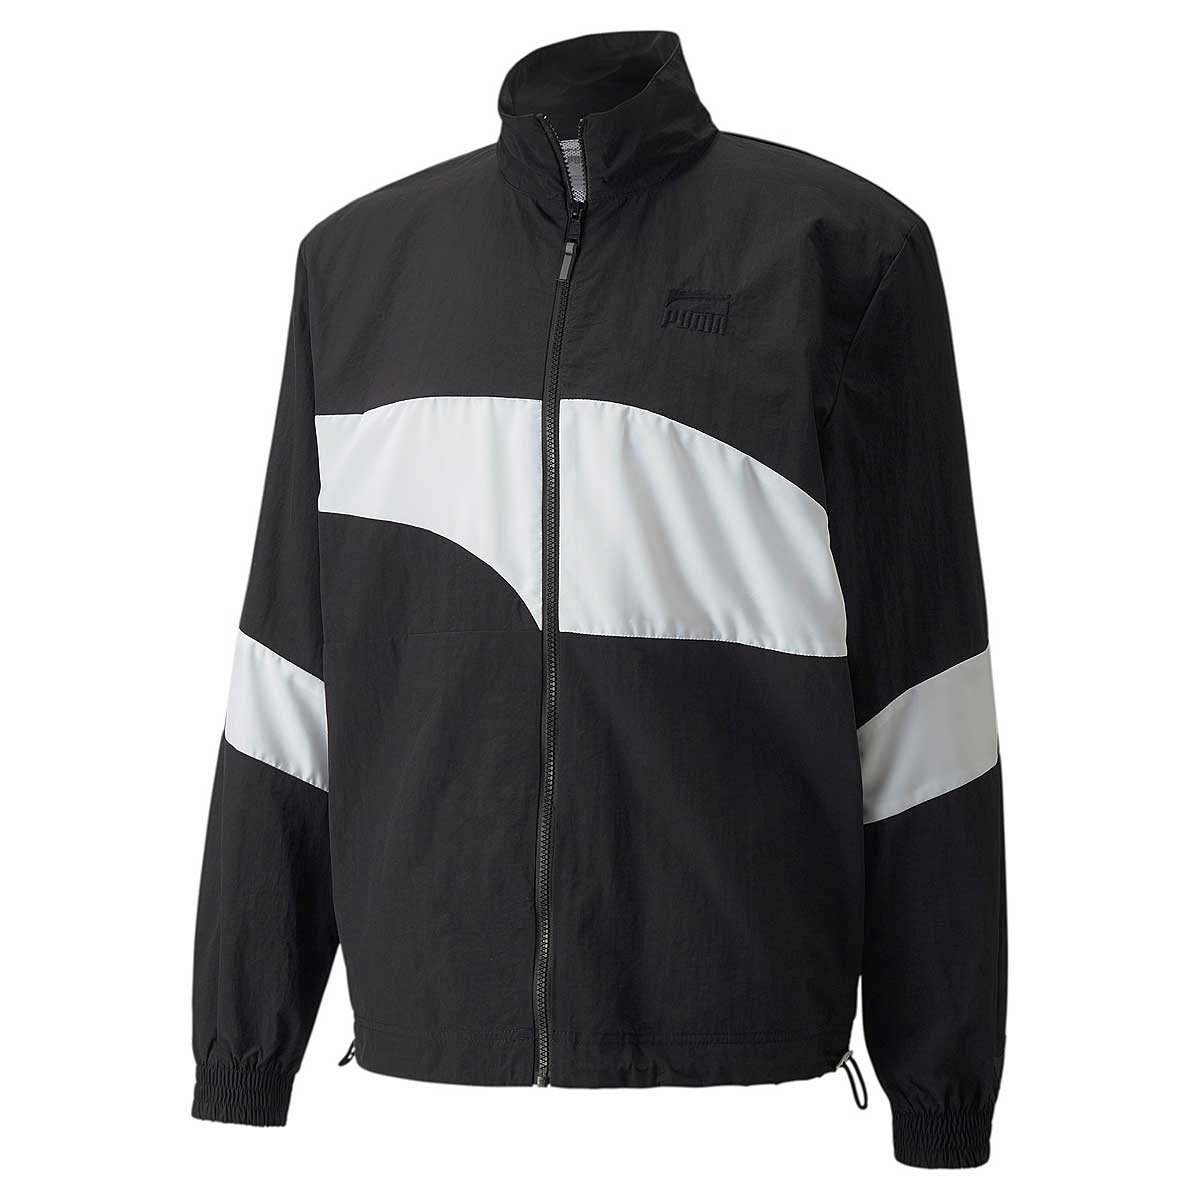 Buy Clyde Jacket for N/A 0.0 on KICKZ.com!